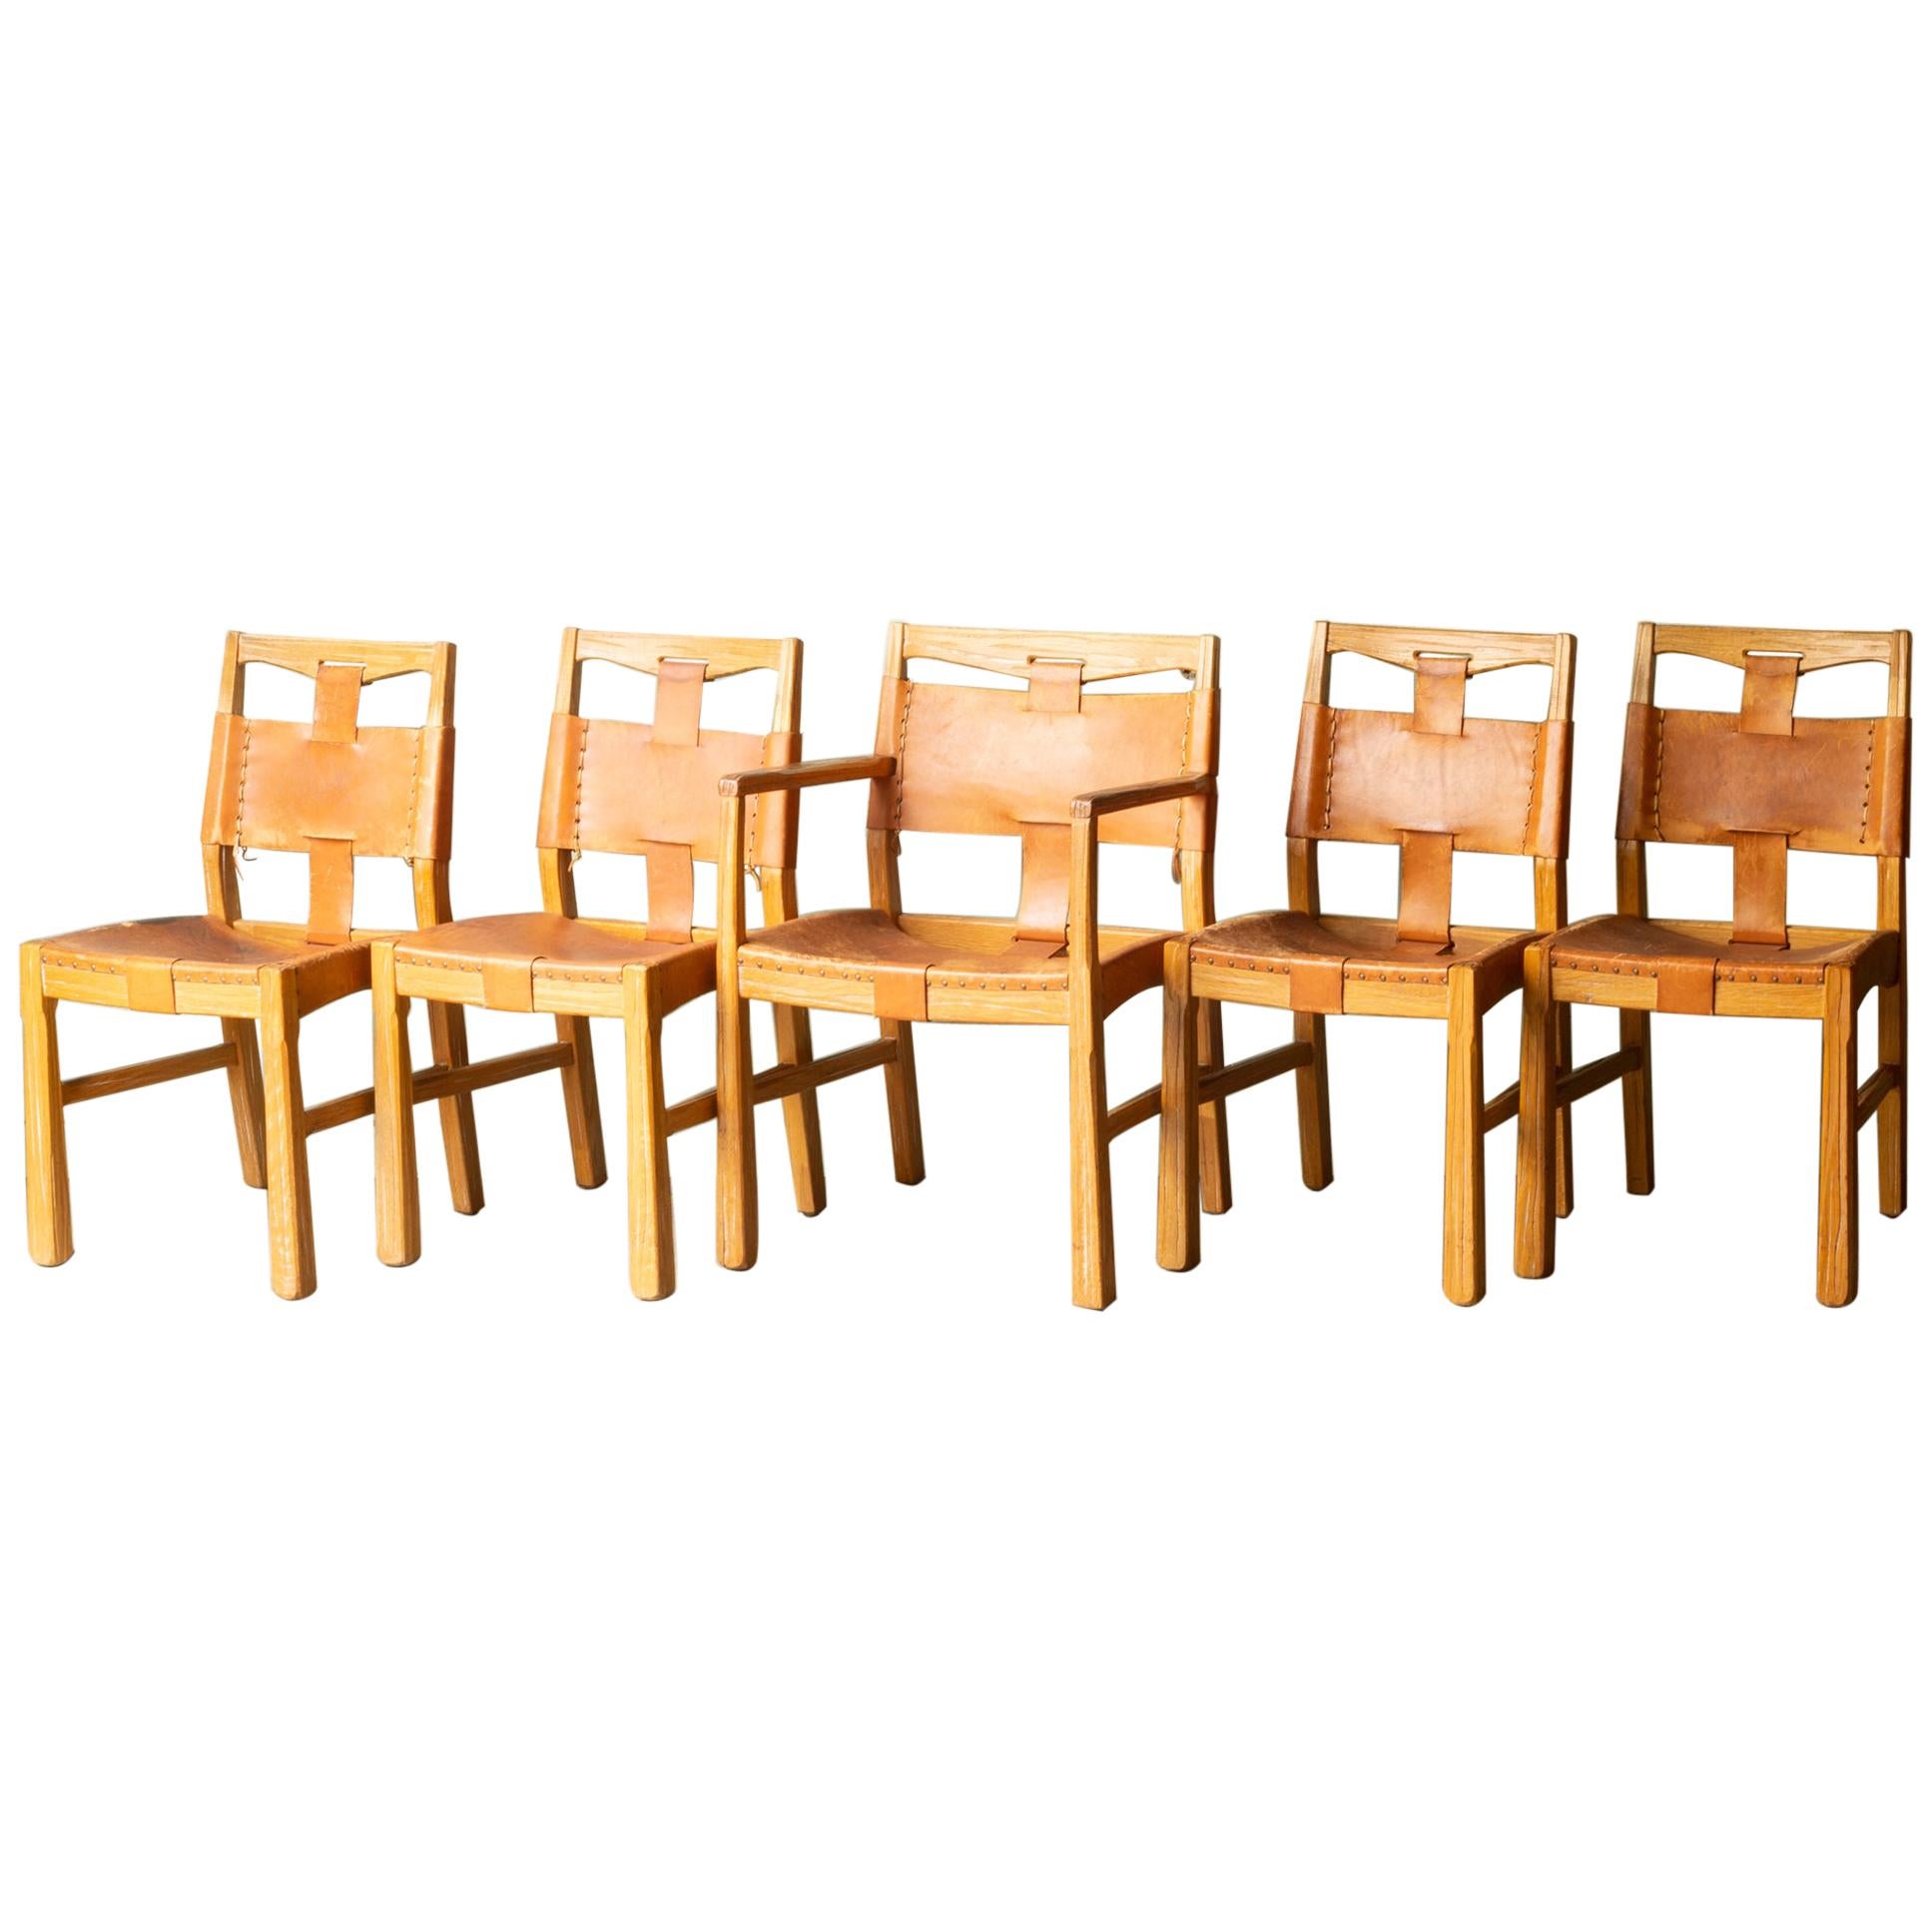 Set of A. Brandt Custom Leather Dining Chairs, circa 1940-1950